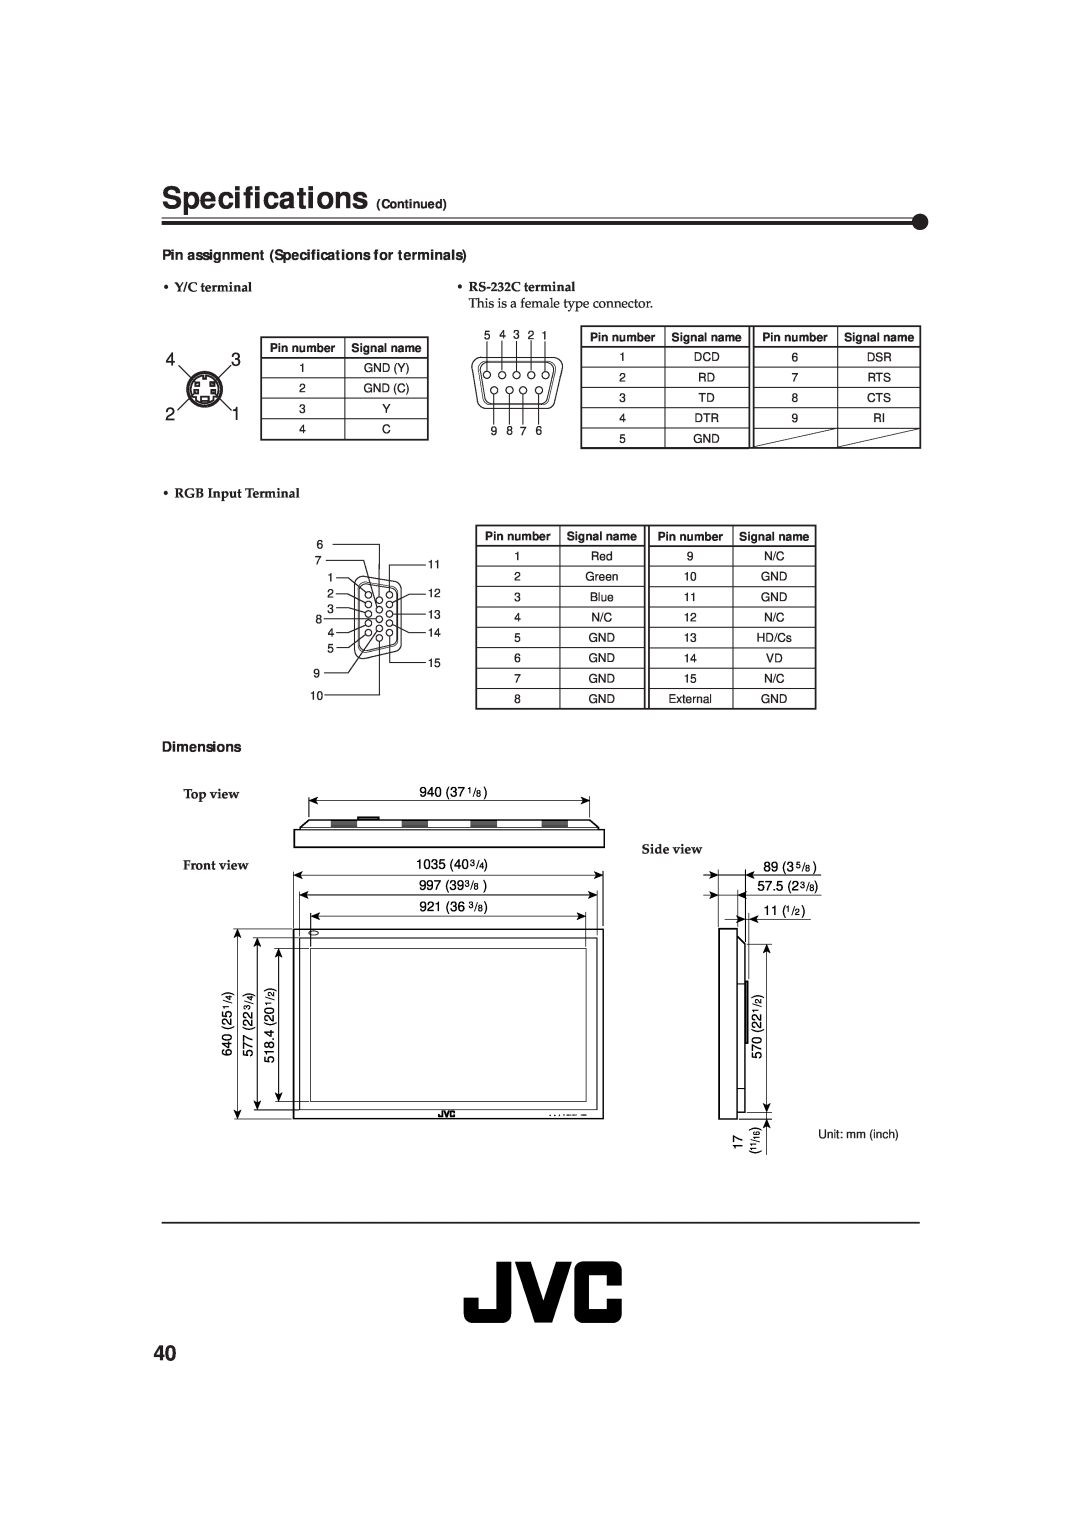 JVC GD-V4211PCE Specifications Continued, Pin assignment Specifications for terminals, Dimensions, Pin number, Signal name 